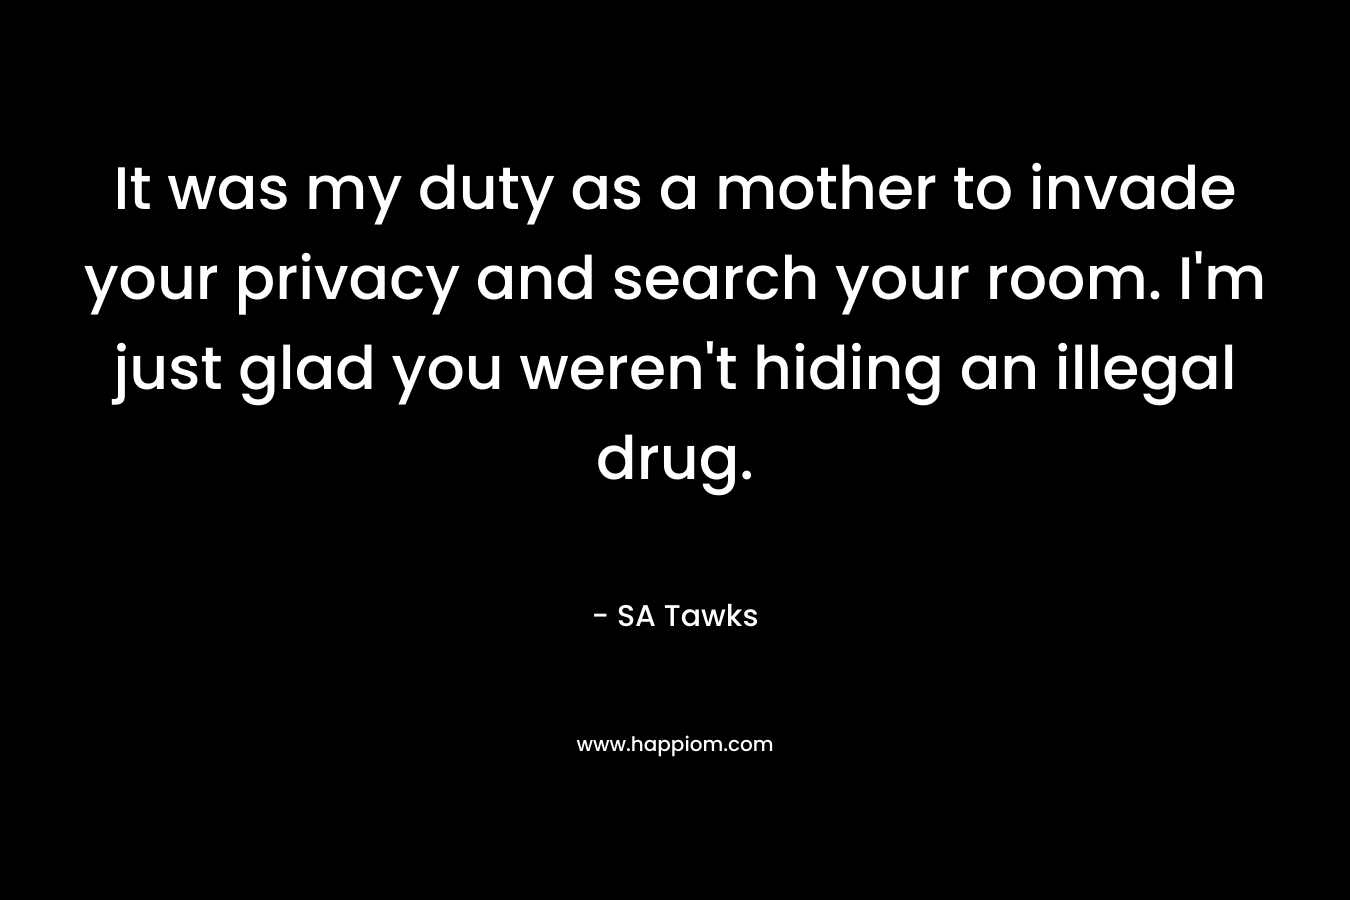 It was my duty as a mother to invade your privacy and search your room. I’m just glad you weren’t hiding an illegal drug. – SA Tawks